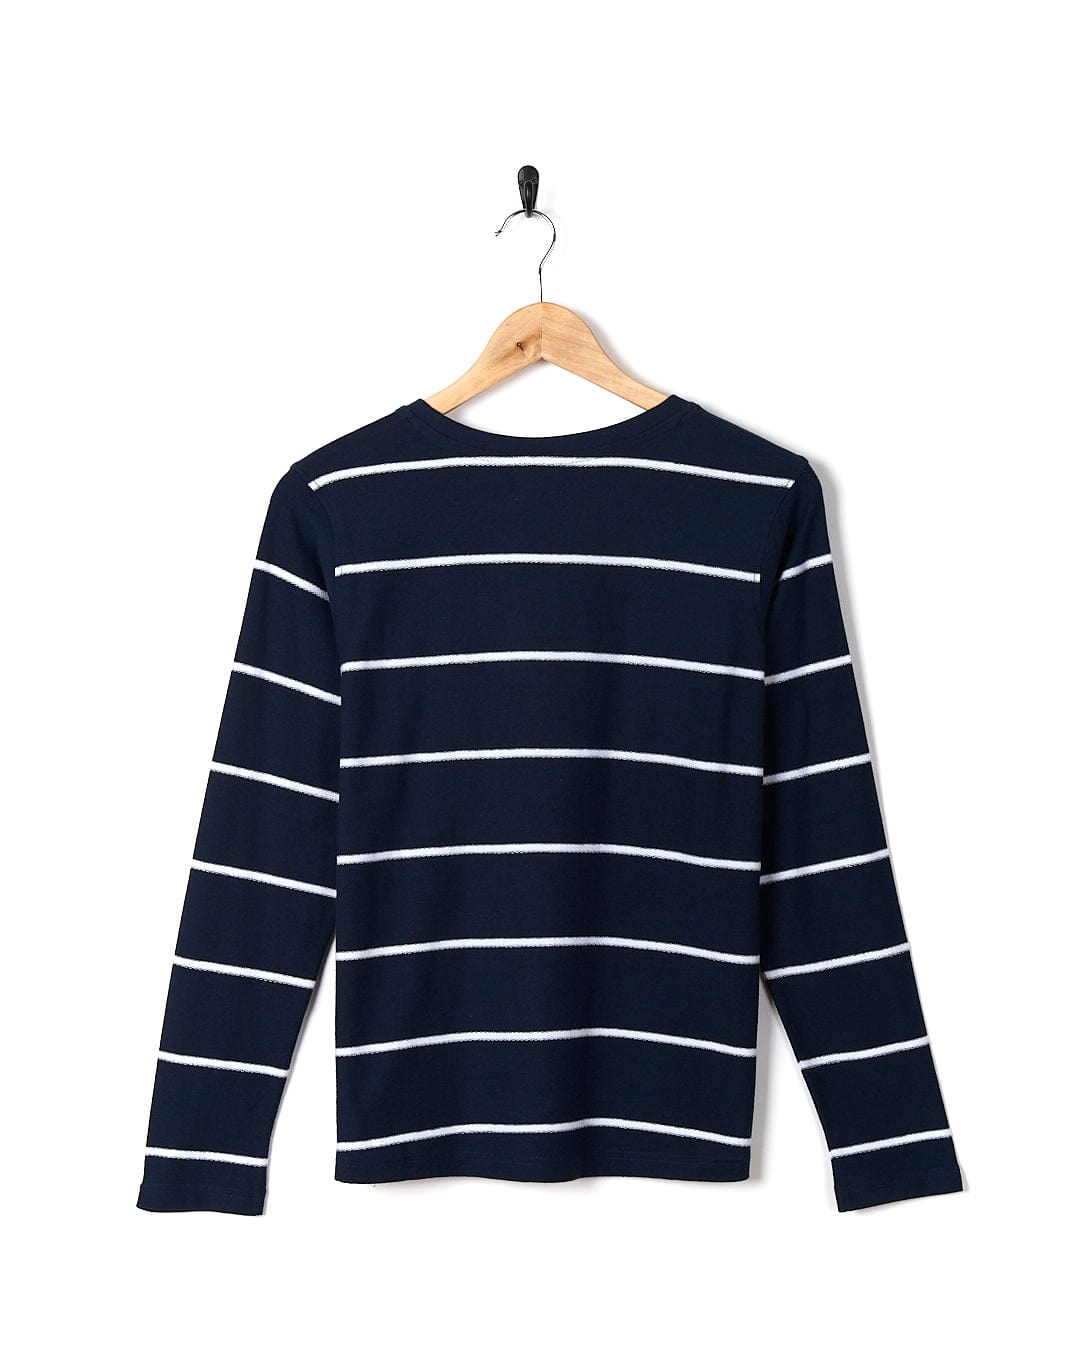 A Saltrock navy blue and white striped women's long sleeve t-shirt hanging on a wooden hanger against a white background.